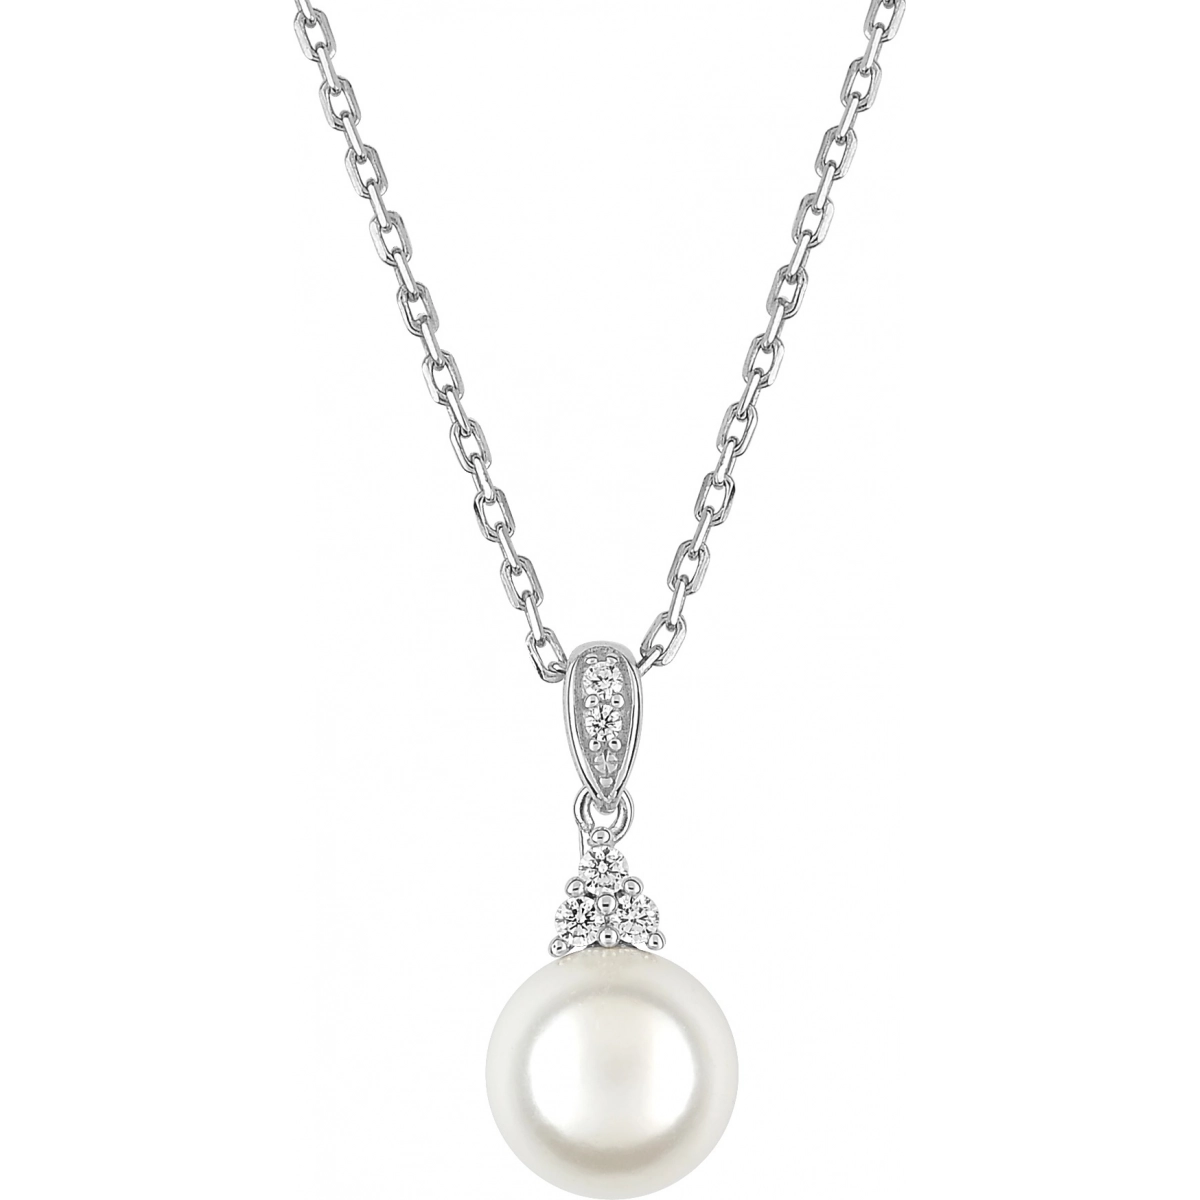 Necklace w. synth pearl and cz rh925 Silver  Lua Blanca  332210.0